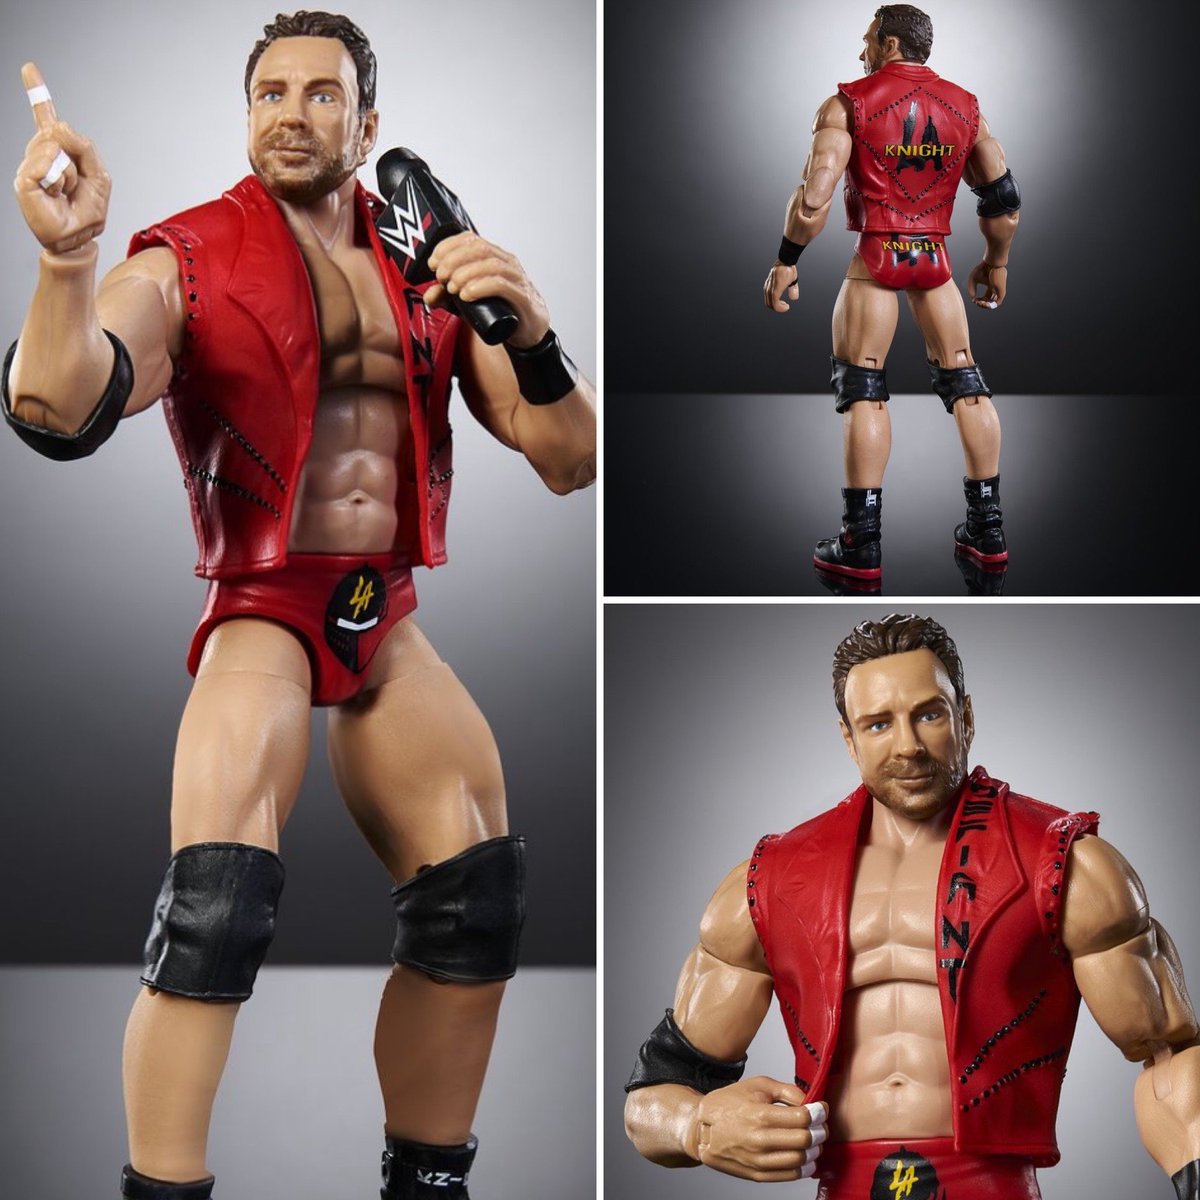 🎤LEMME TALK TO YA🎤

Thanks to @smythstoys we have our first look at the @reallaknight #WWE Elite 108! Visit smythstoys.com if you’re in the UK, or if you’re in the US, visit @ringsidec and use code AIC to save 10%

ringsidecollectibles.com/wwe-elite-108-…

#royalrumble #LAKnight #toys